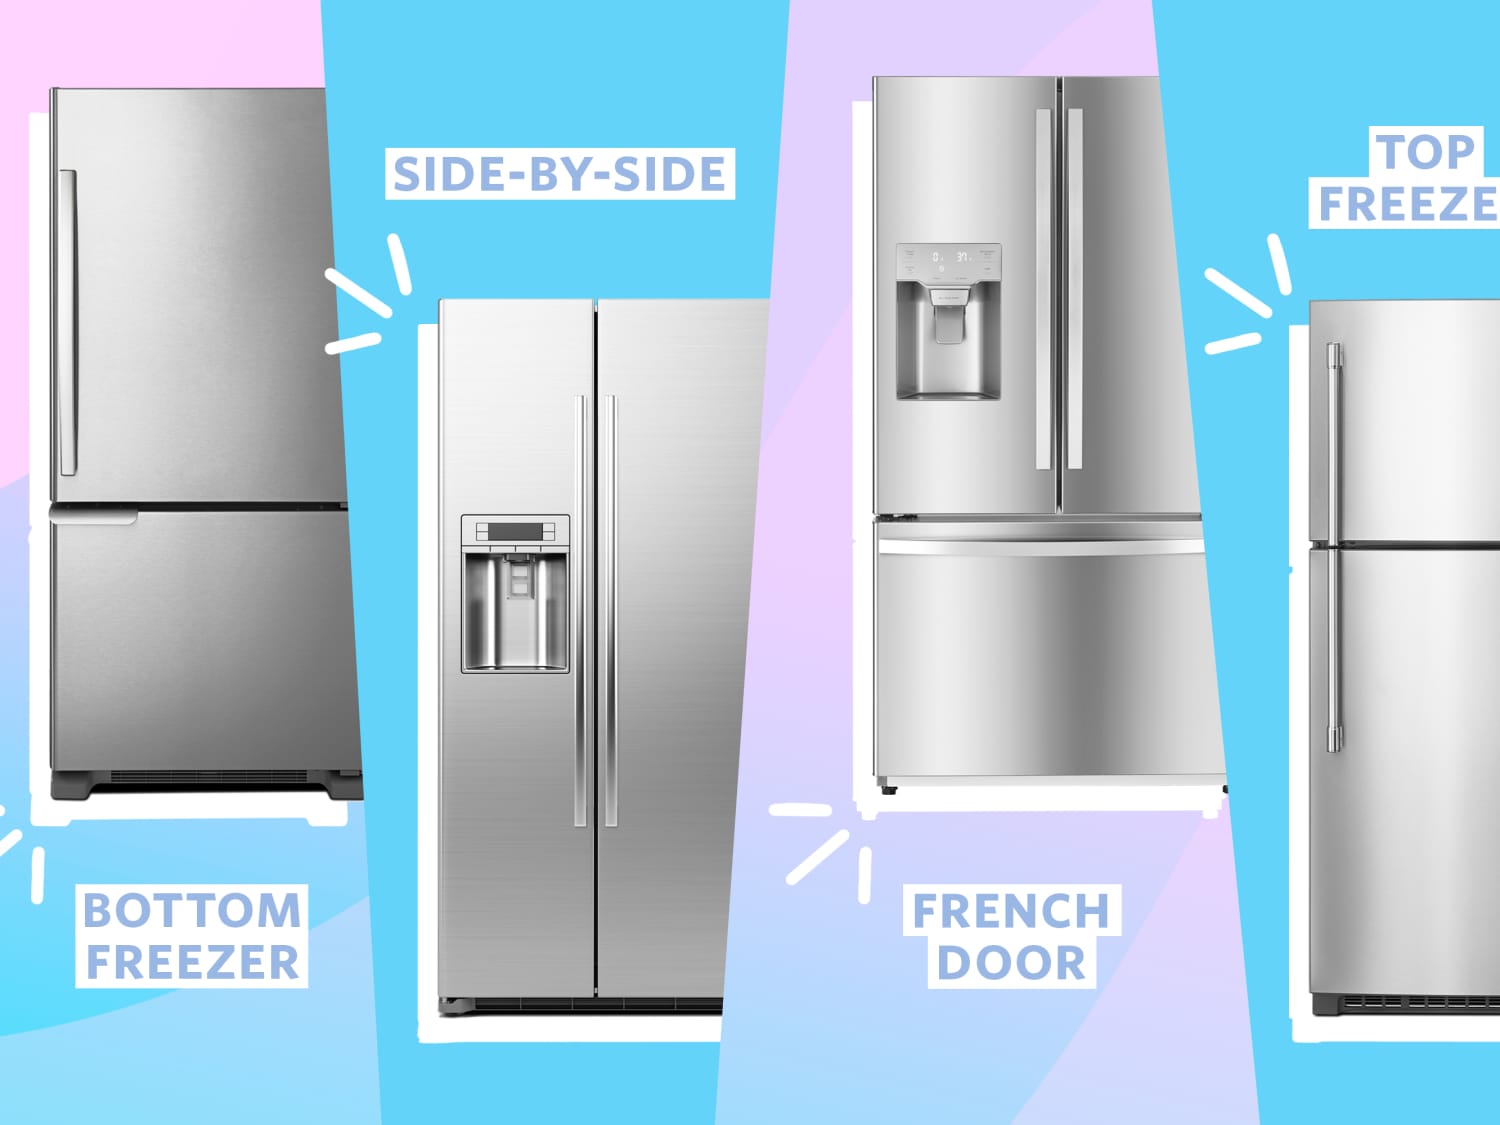 What is the difference between fridge and freezer? - Quora